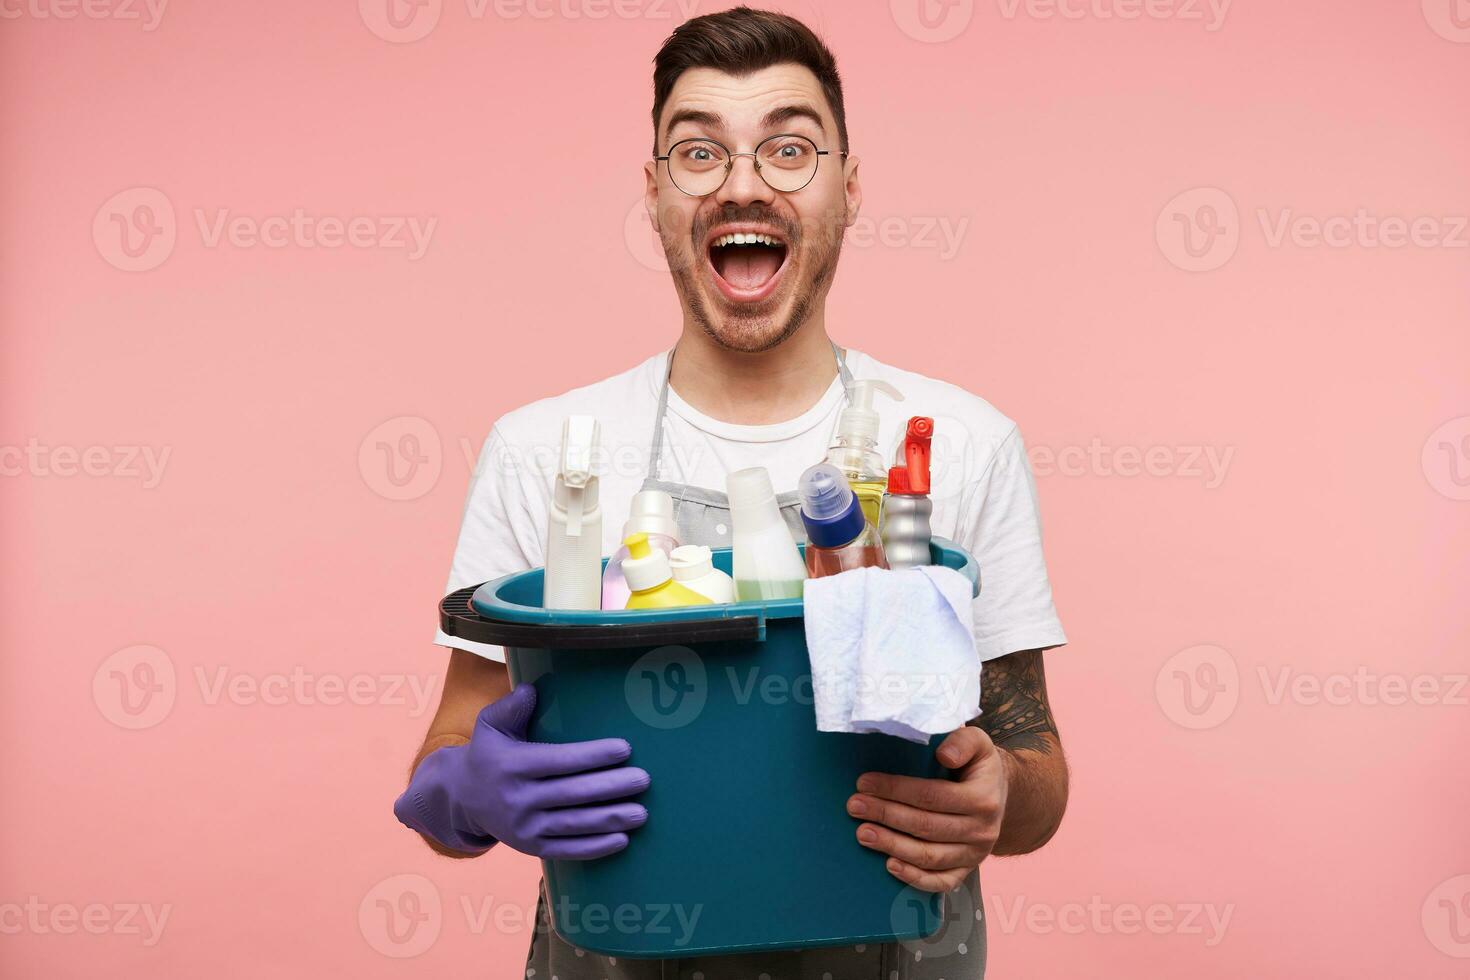 Excited young brunette bearded man with short haircut looking at camera with wide eyes and mouth opened while holding detergents, standing over pink background photo